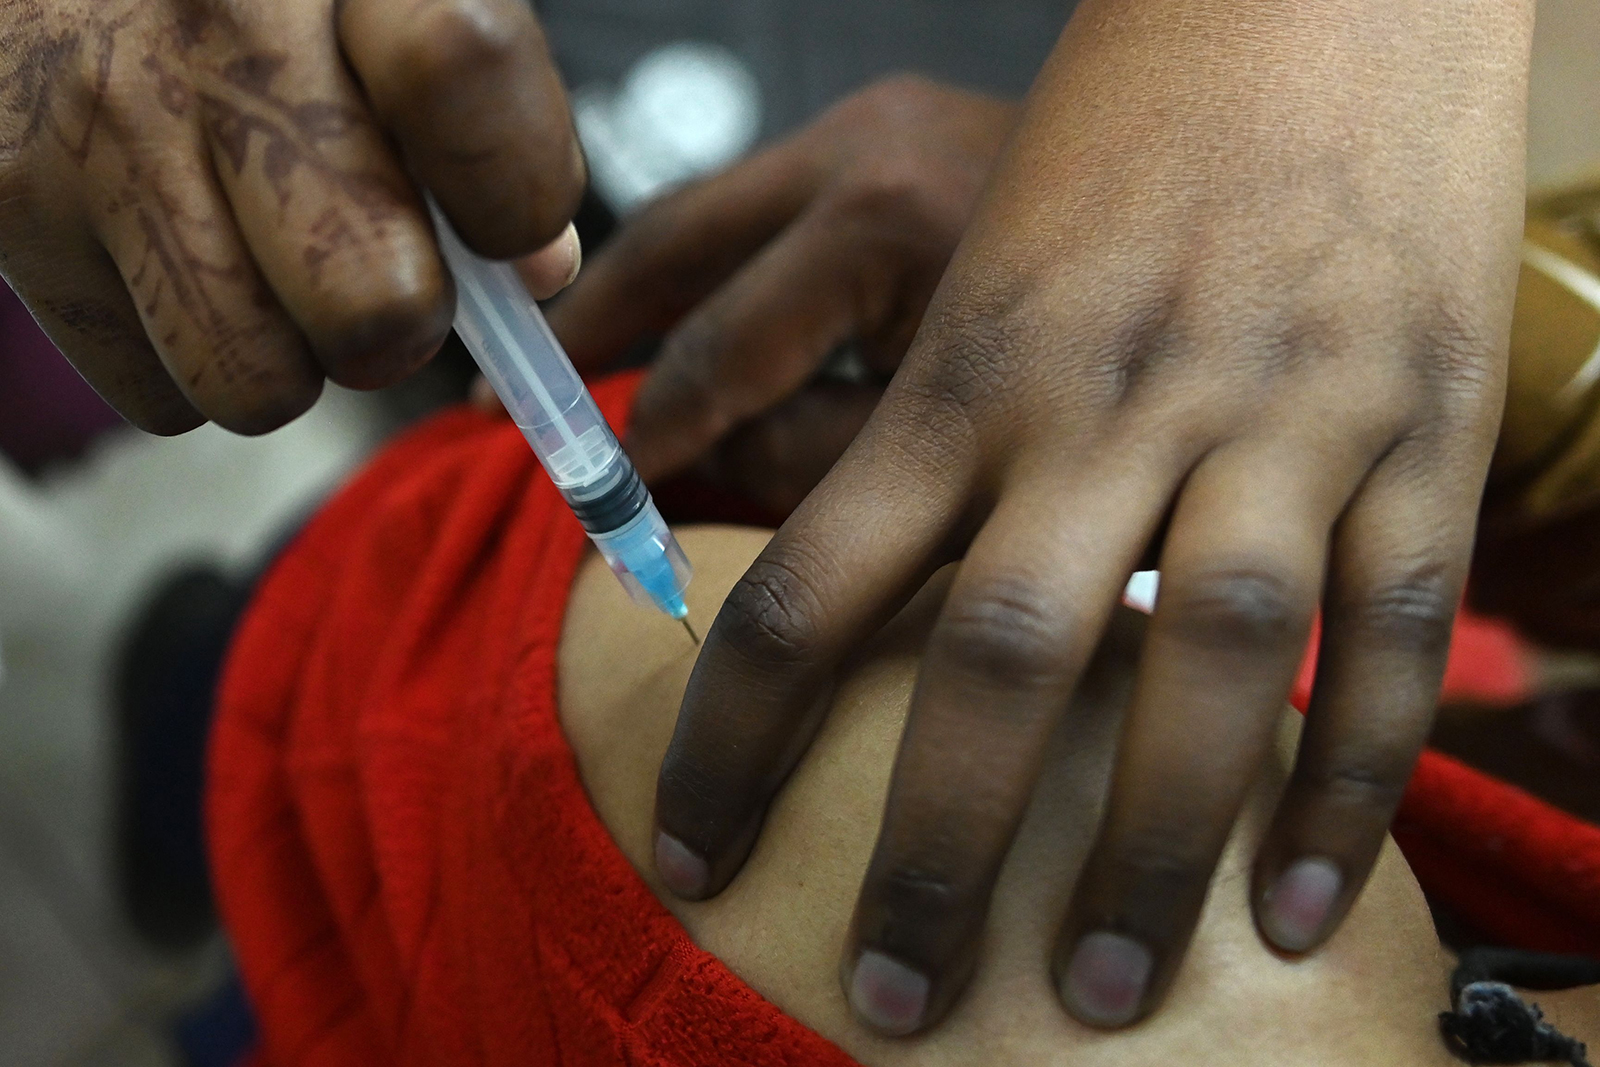 A medical worker inoculates a municipal worker with a Covid-19 vaccine at a vaccination center in New Delhi, India, on February 22.